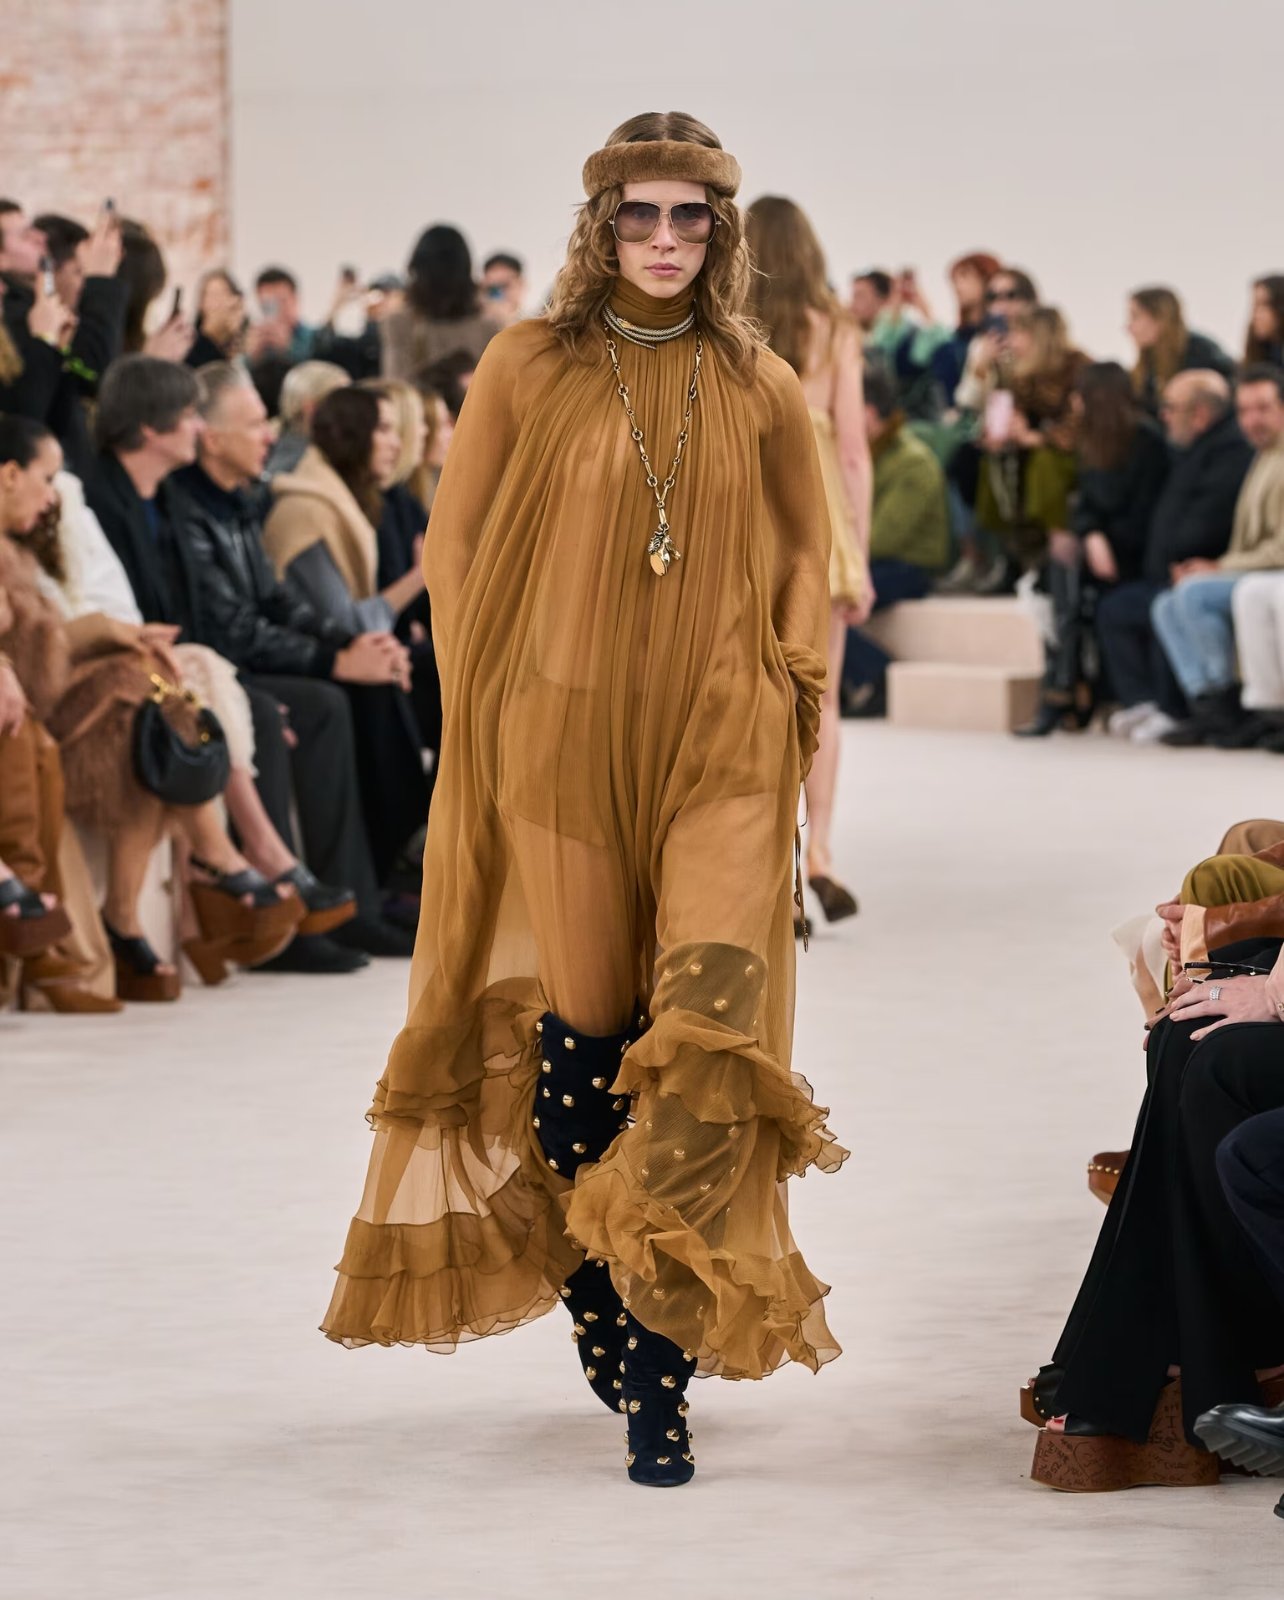 A look from Chloe’s fall/winter fashion show featuring a sheer maxi dress with suede thigh high boots